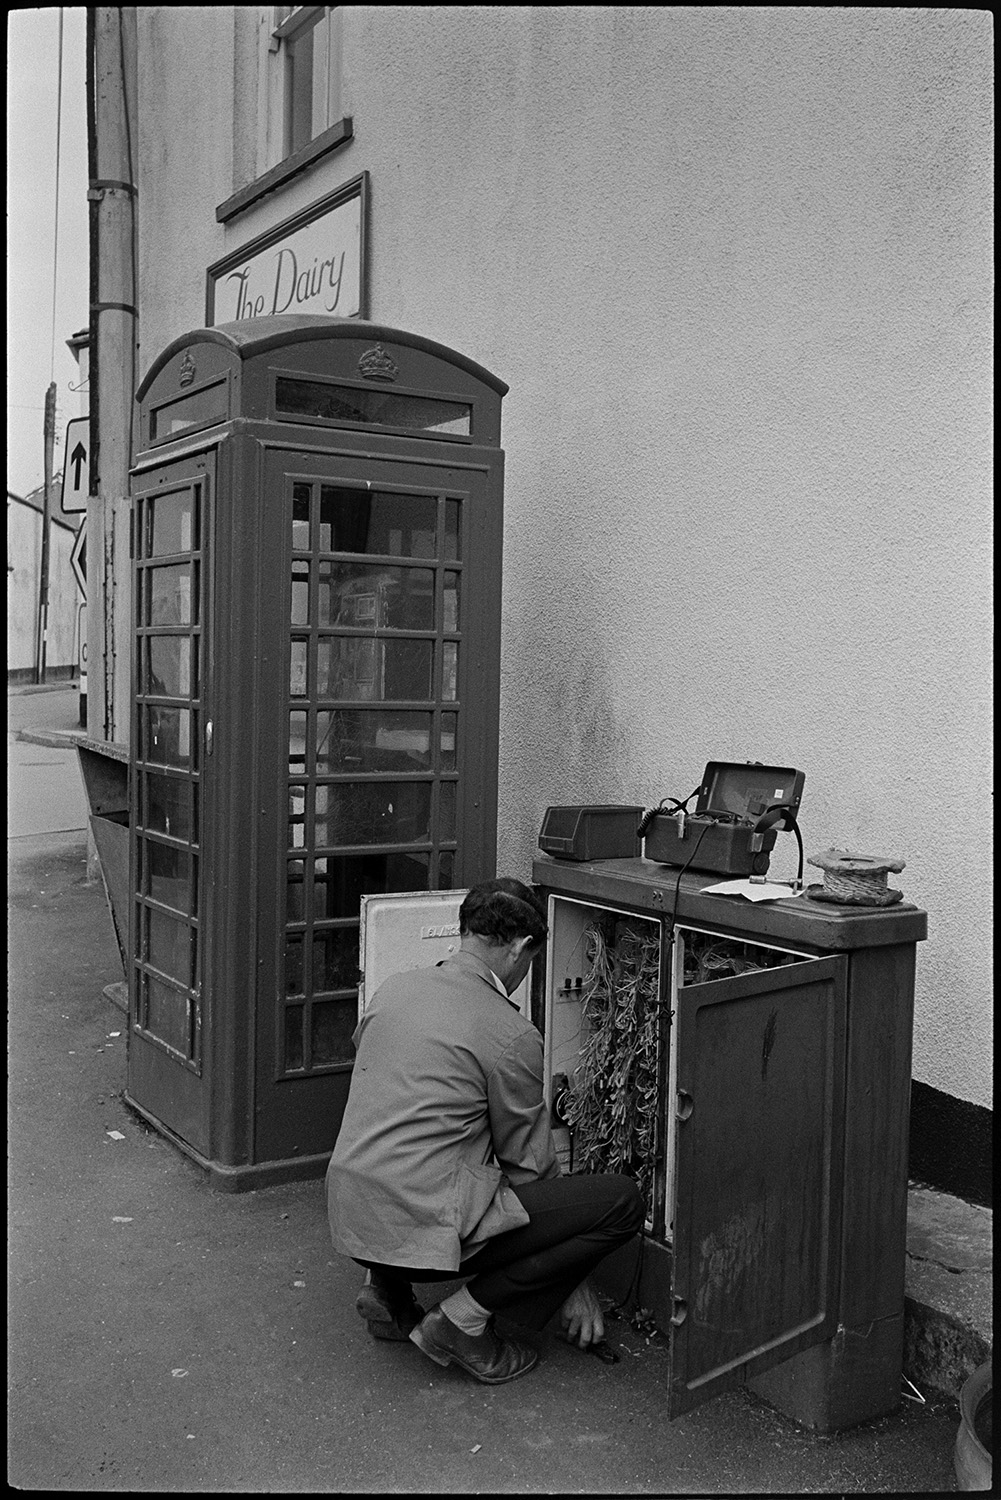 Telephone engineer working in junction box in front of telephone kiosk.
[A man working on telephone wires in a junction box next to a phone box in the street outside The Dairy in Chulmleigh.]